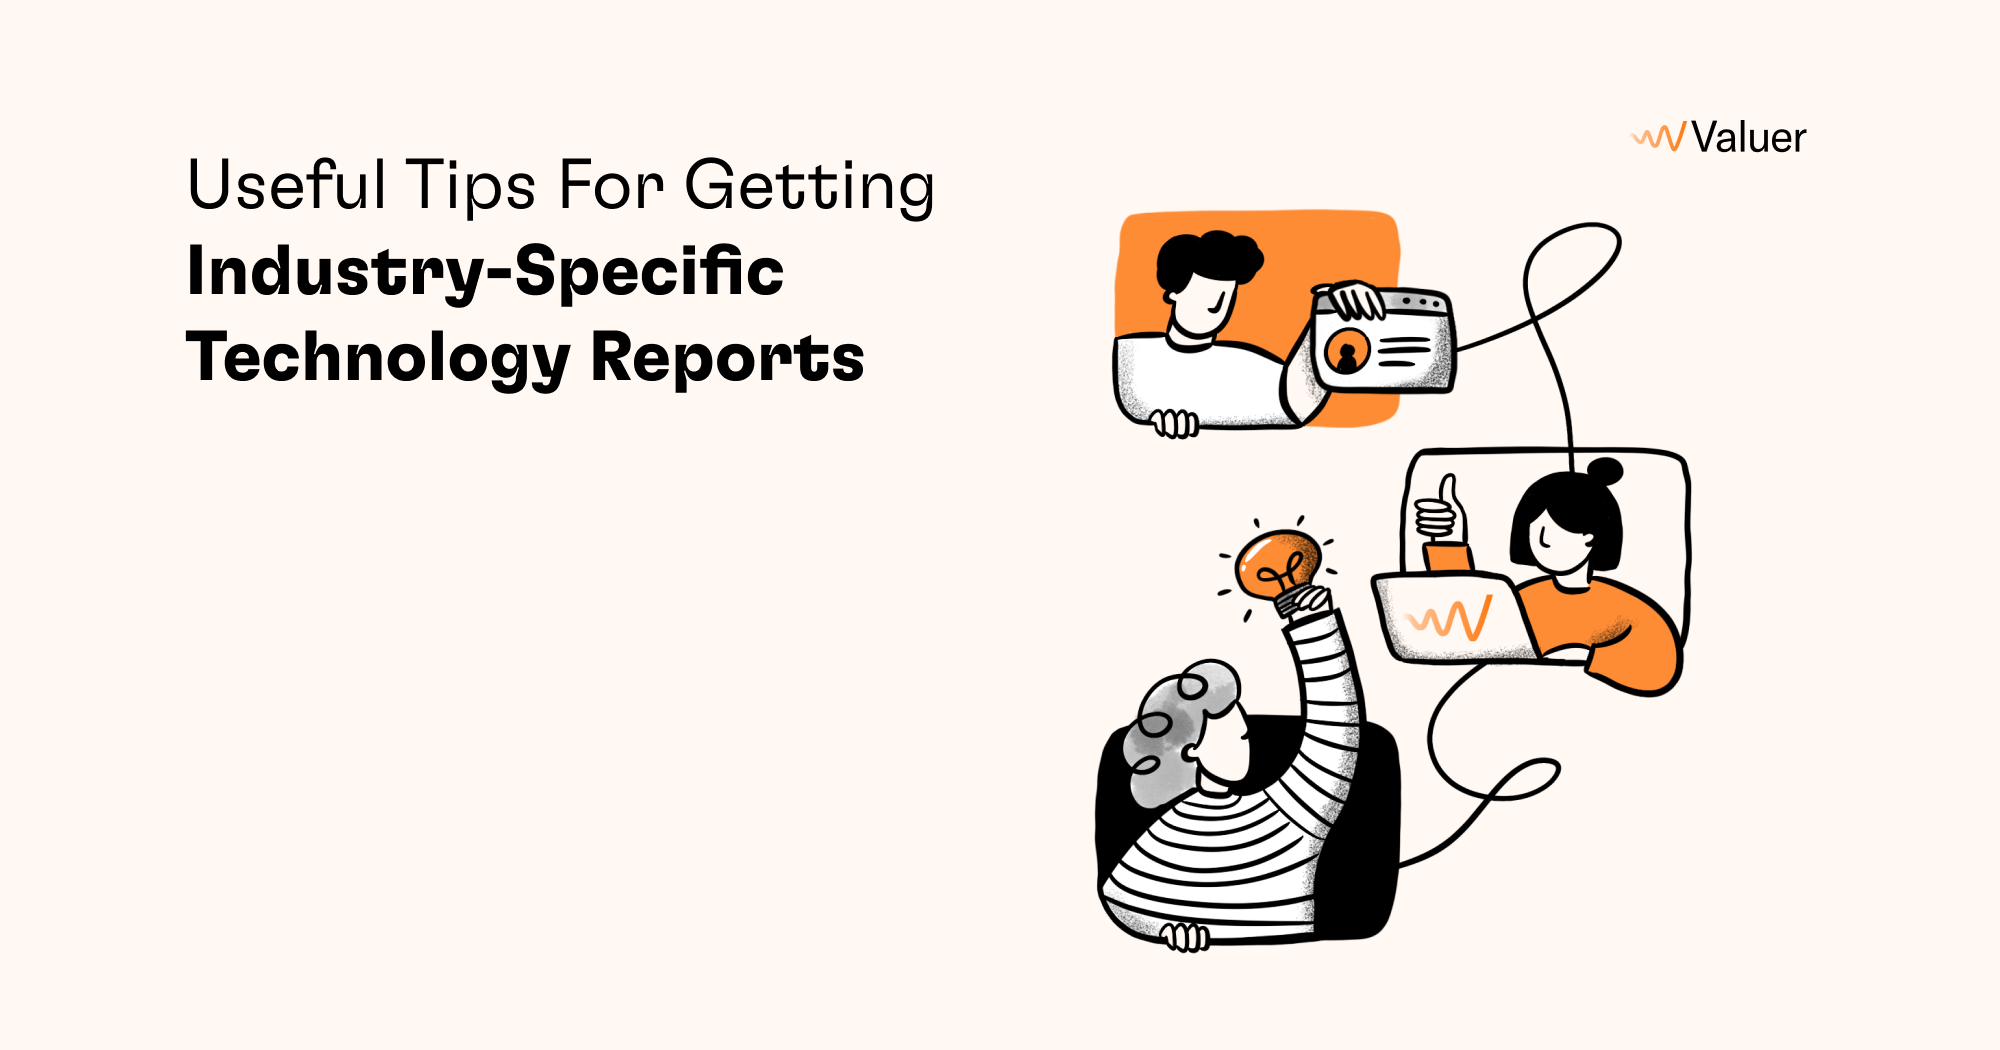 Useful Tips for Getting Industry-Specific Technology Reports